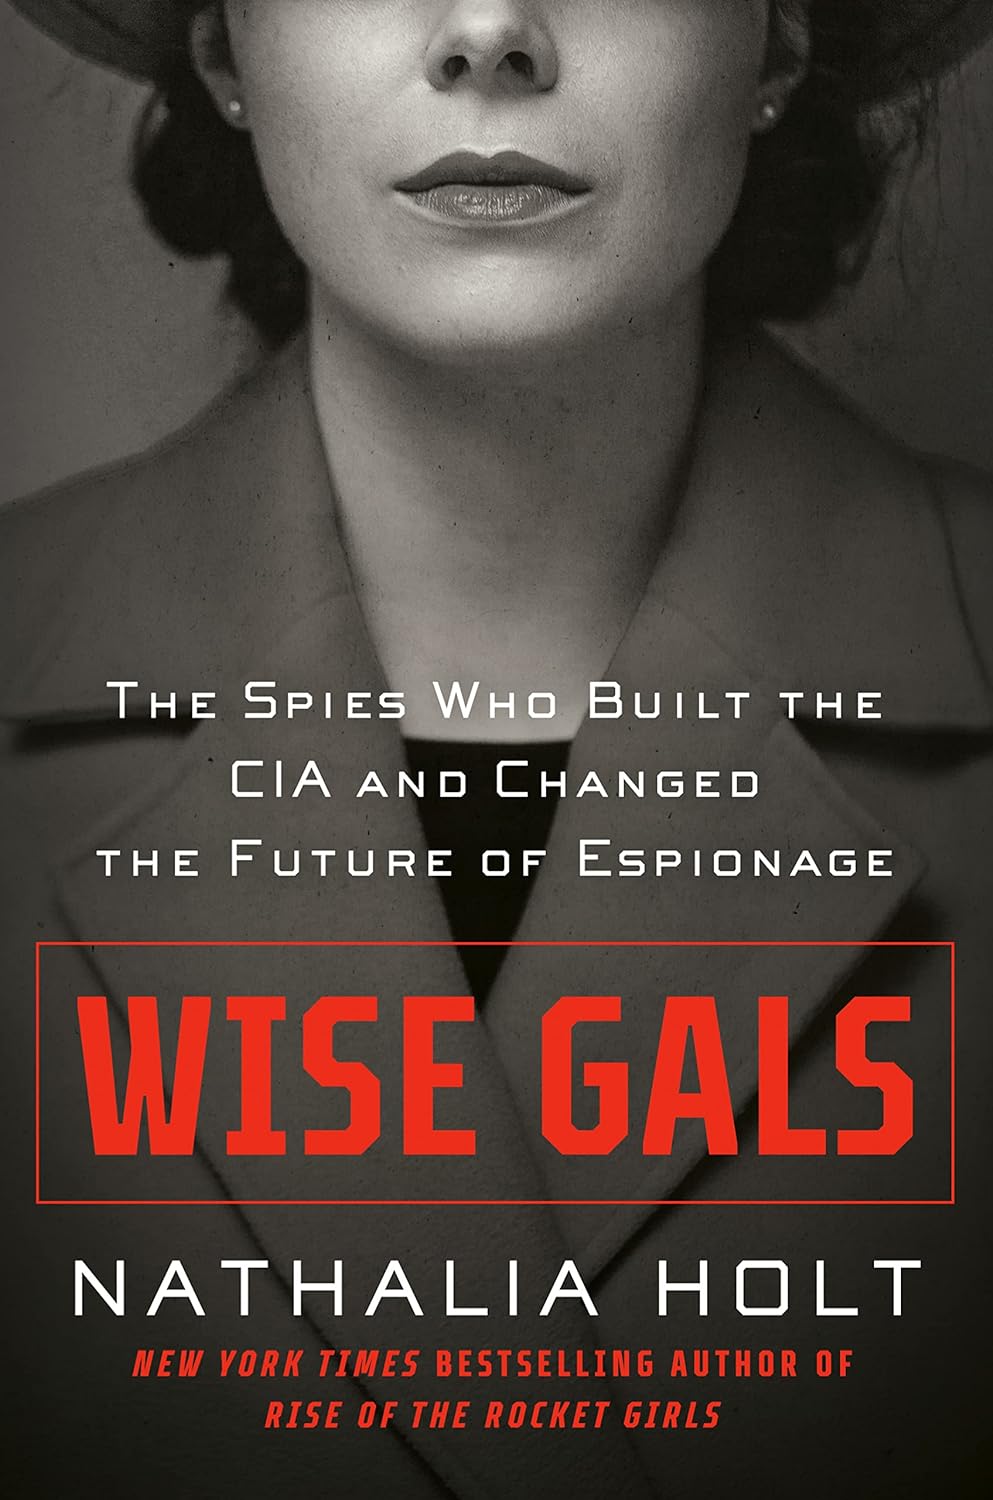 Image for "Wise Gals: The Spies Who Built the CIA and Changed the Future of Espionage"